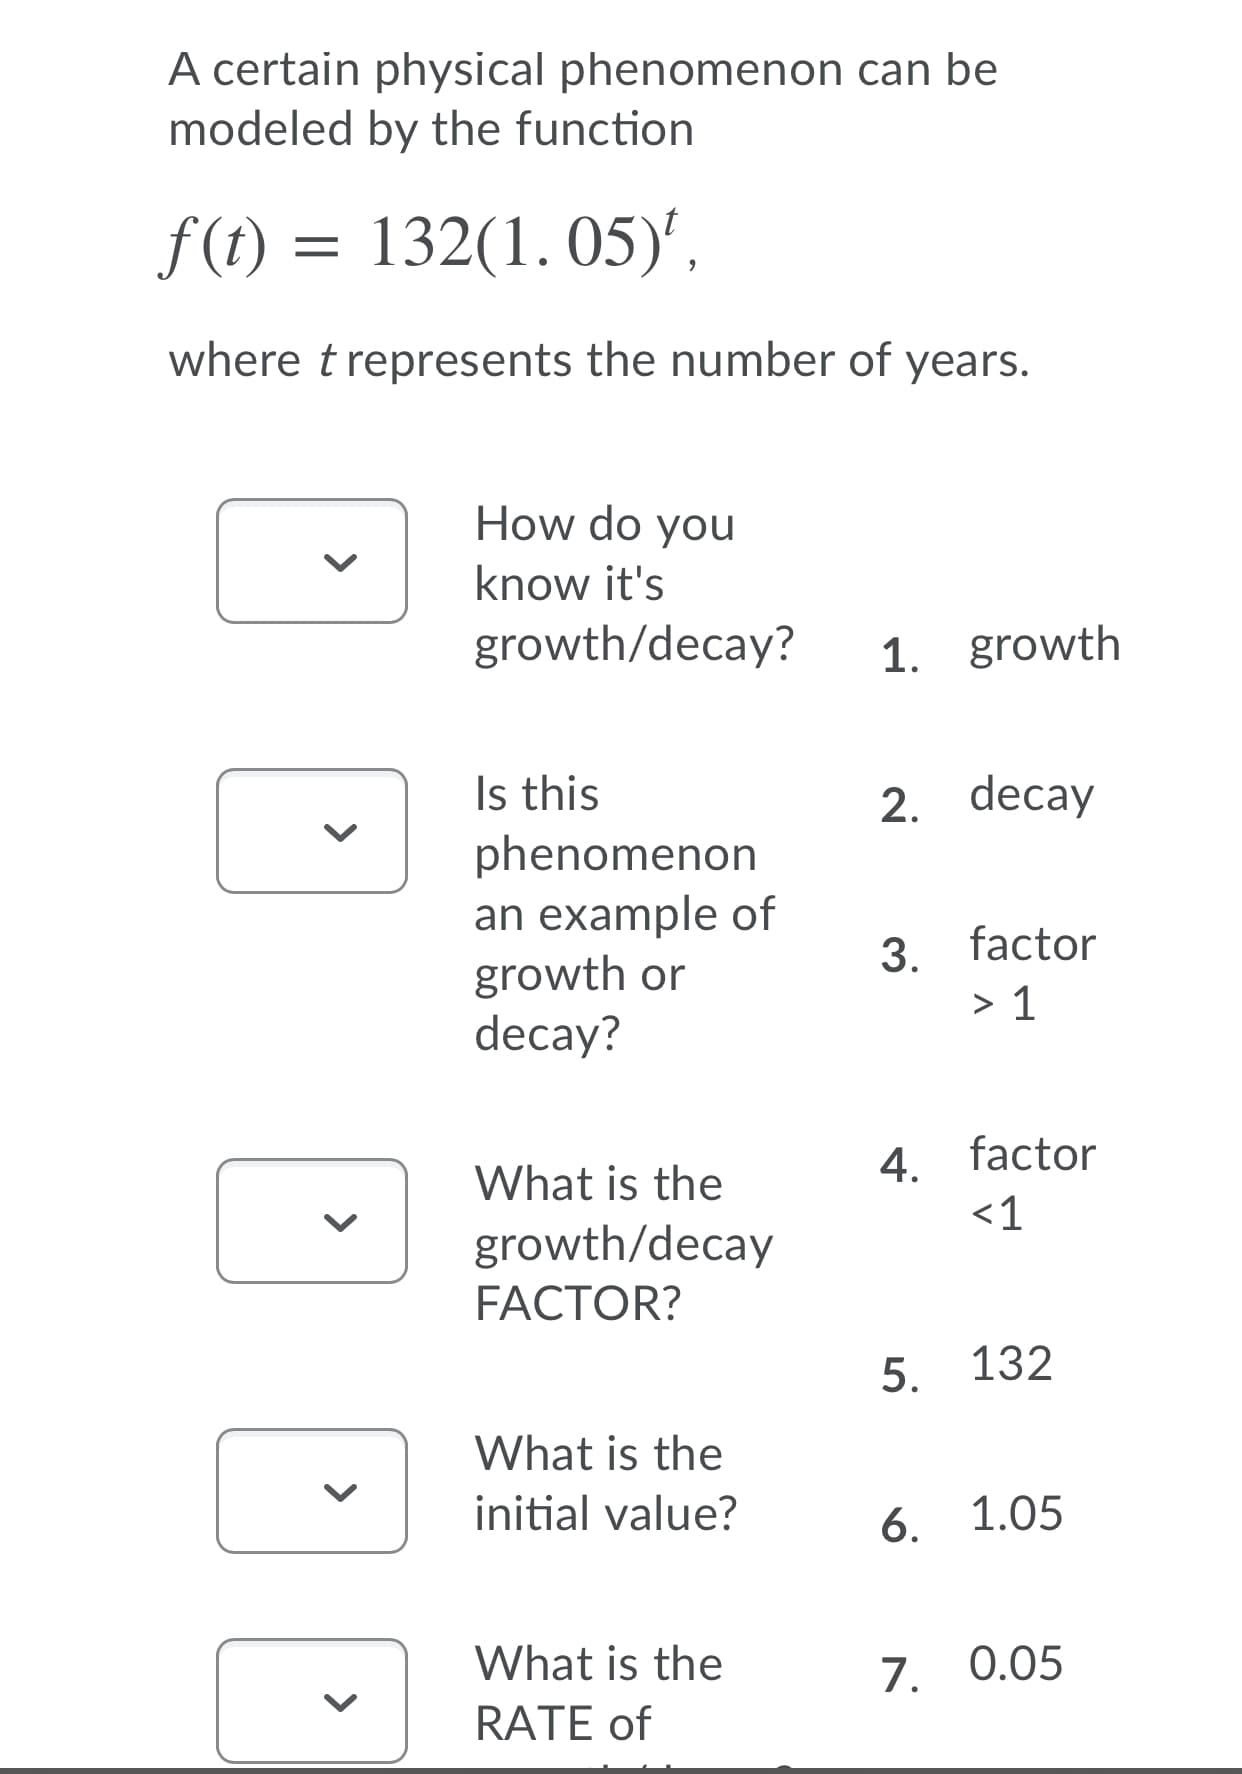 A certain physical phenomenon can be
modeled by the function
f(t) = 132(1. 05)',
where t represents the number of years.
How do you
know it's
growth/decay?
1. growth
Is this
phenomenon
an example of
growth or
decay?
2. decay
3. factor
> 1
4. factor
<1
What is the
growth/decay
FACTOR?
5. 132
What is the
initial value?
6.
1.05
What is the
7. 0.05
RATE of
